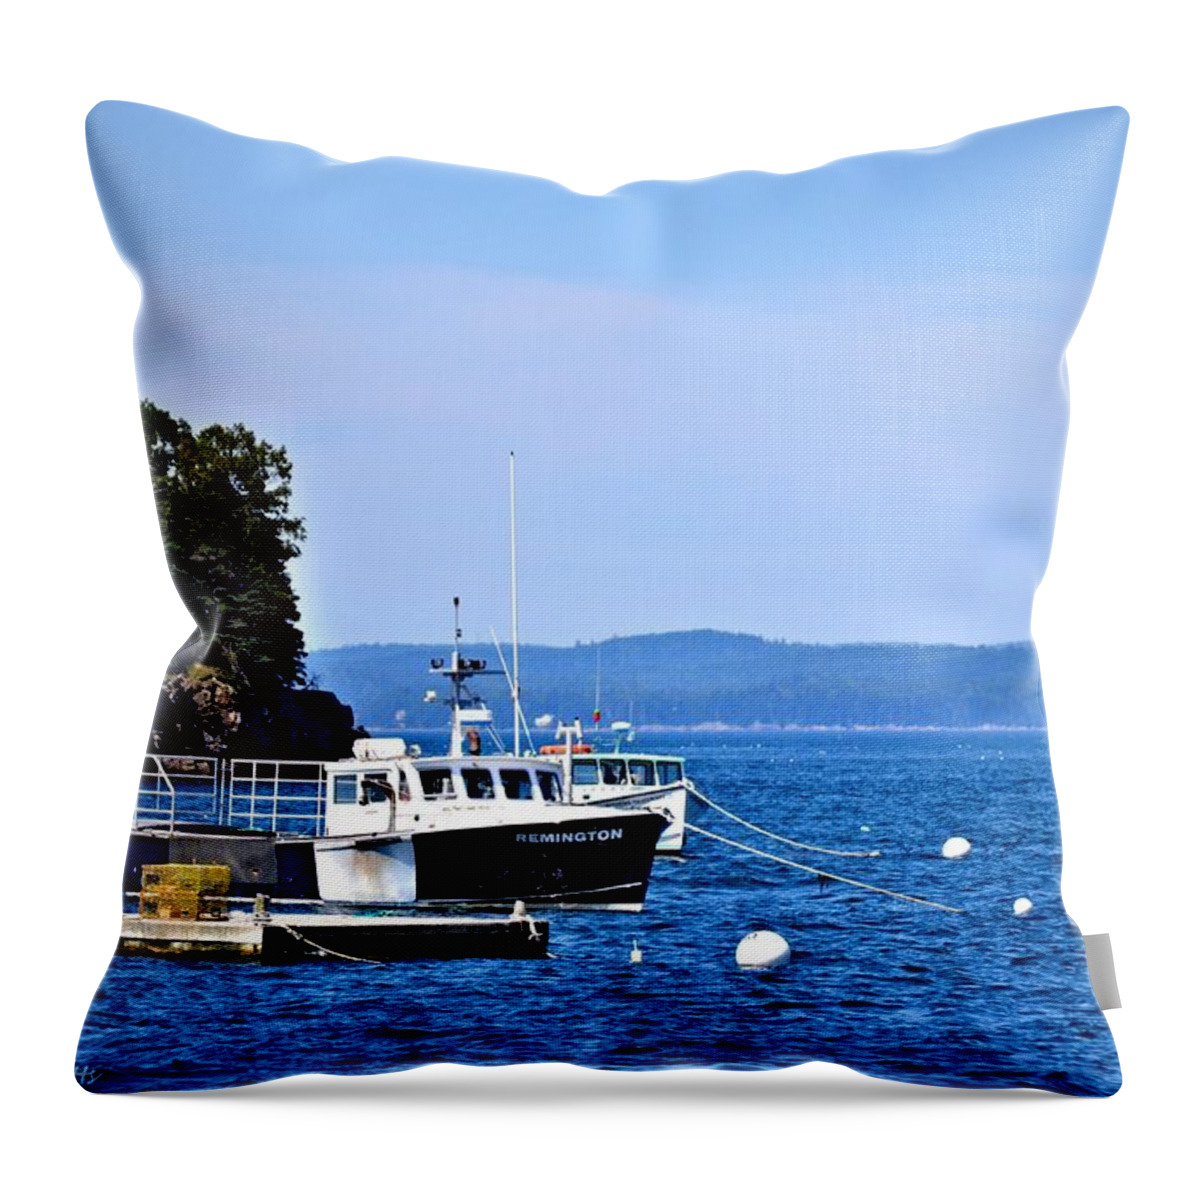 Remington Throw Pillow featuring the photograph Remington Lobster Boat by Tara Potts